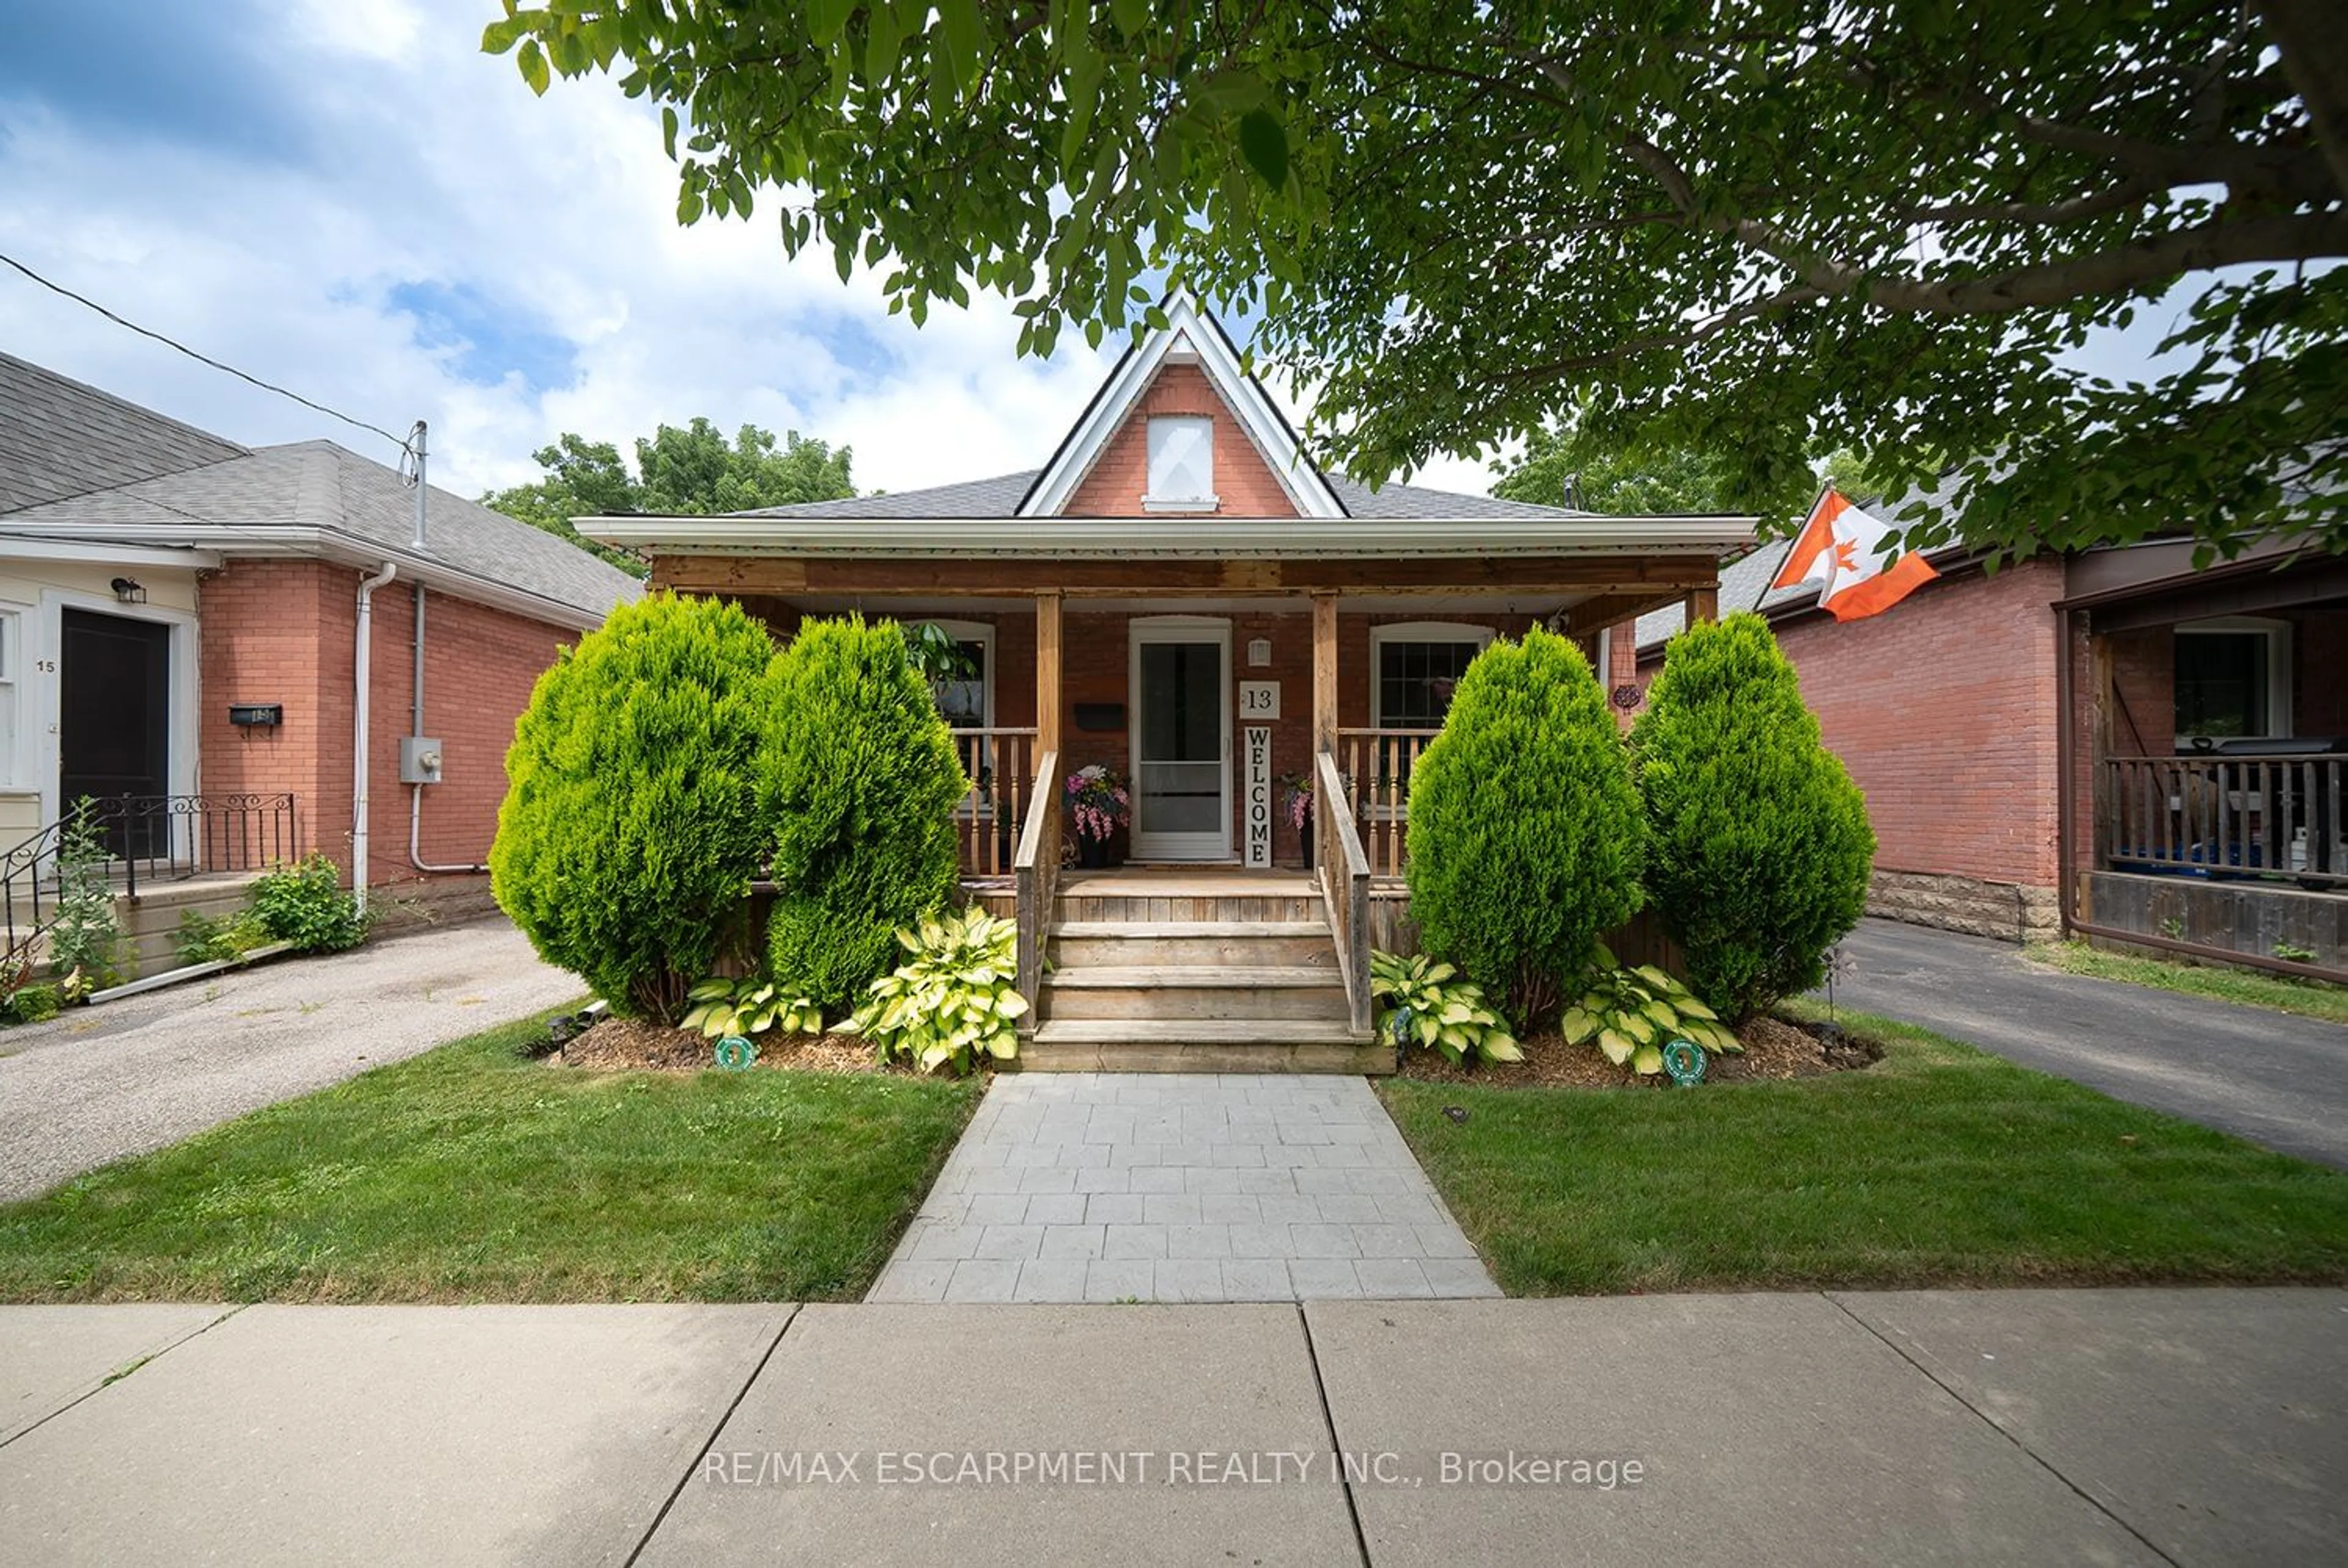 Frontside or backside of a home for 13 Strathcona Ave, Brantford Ontario N3S 1T4